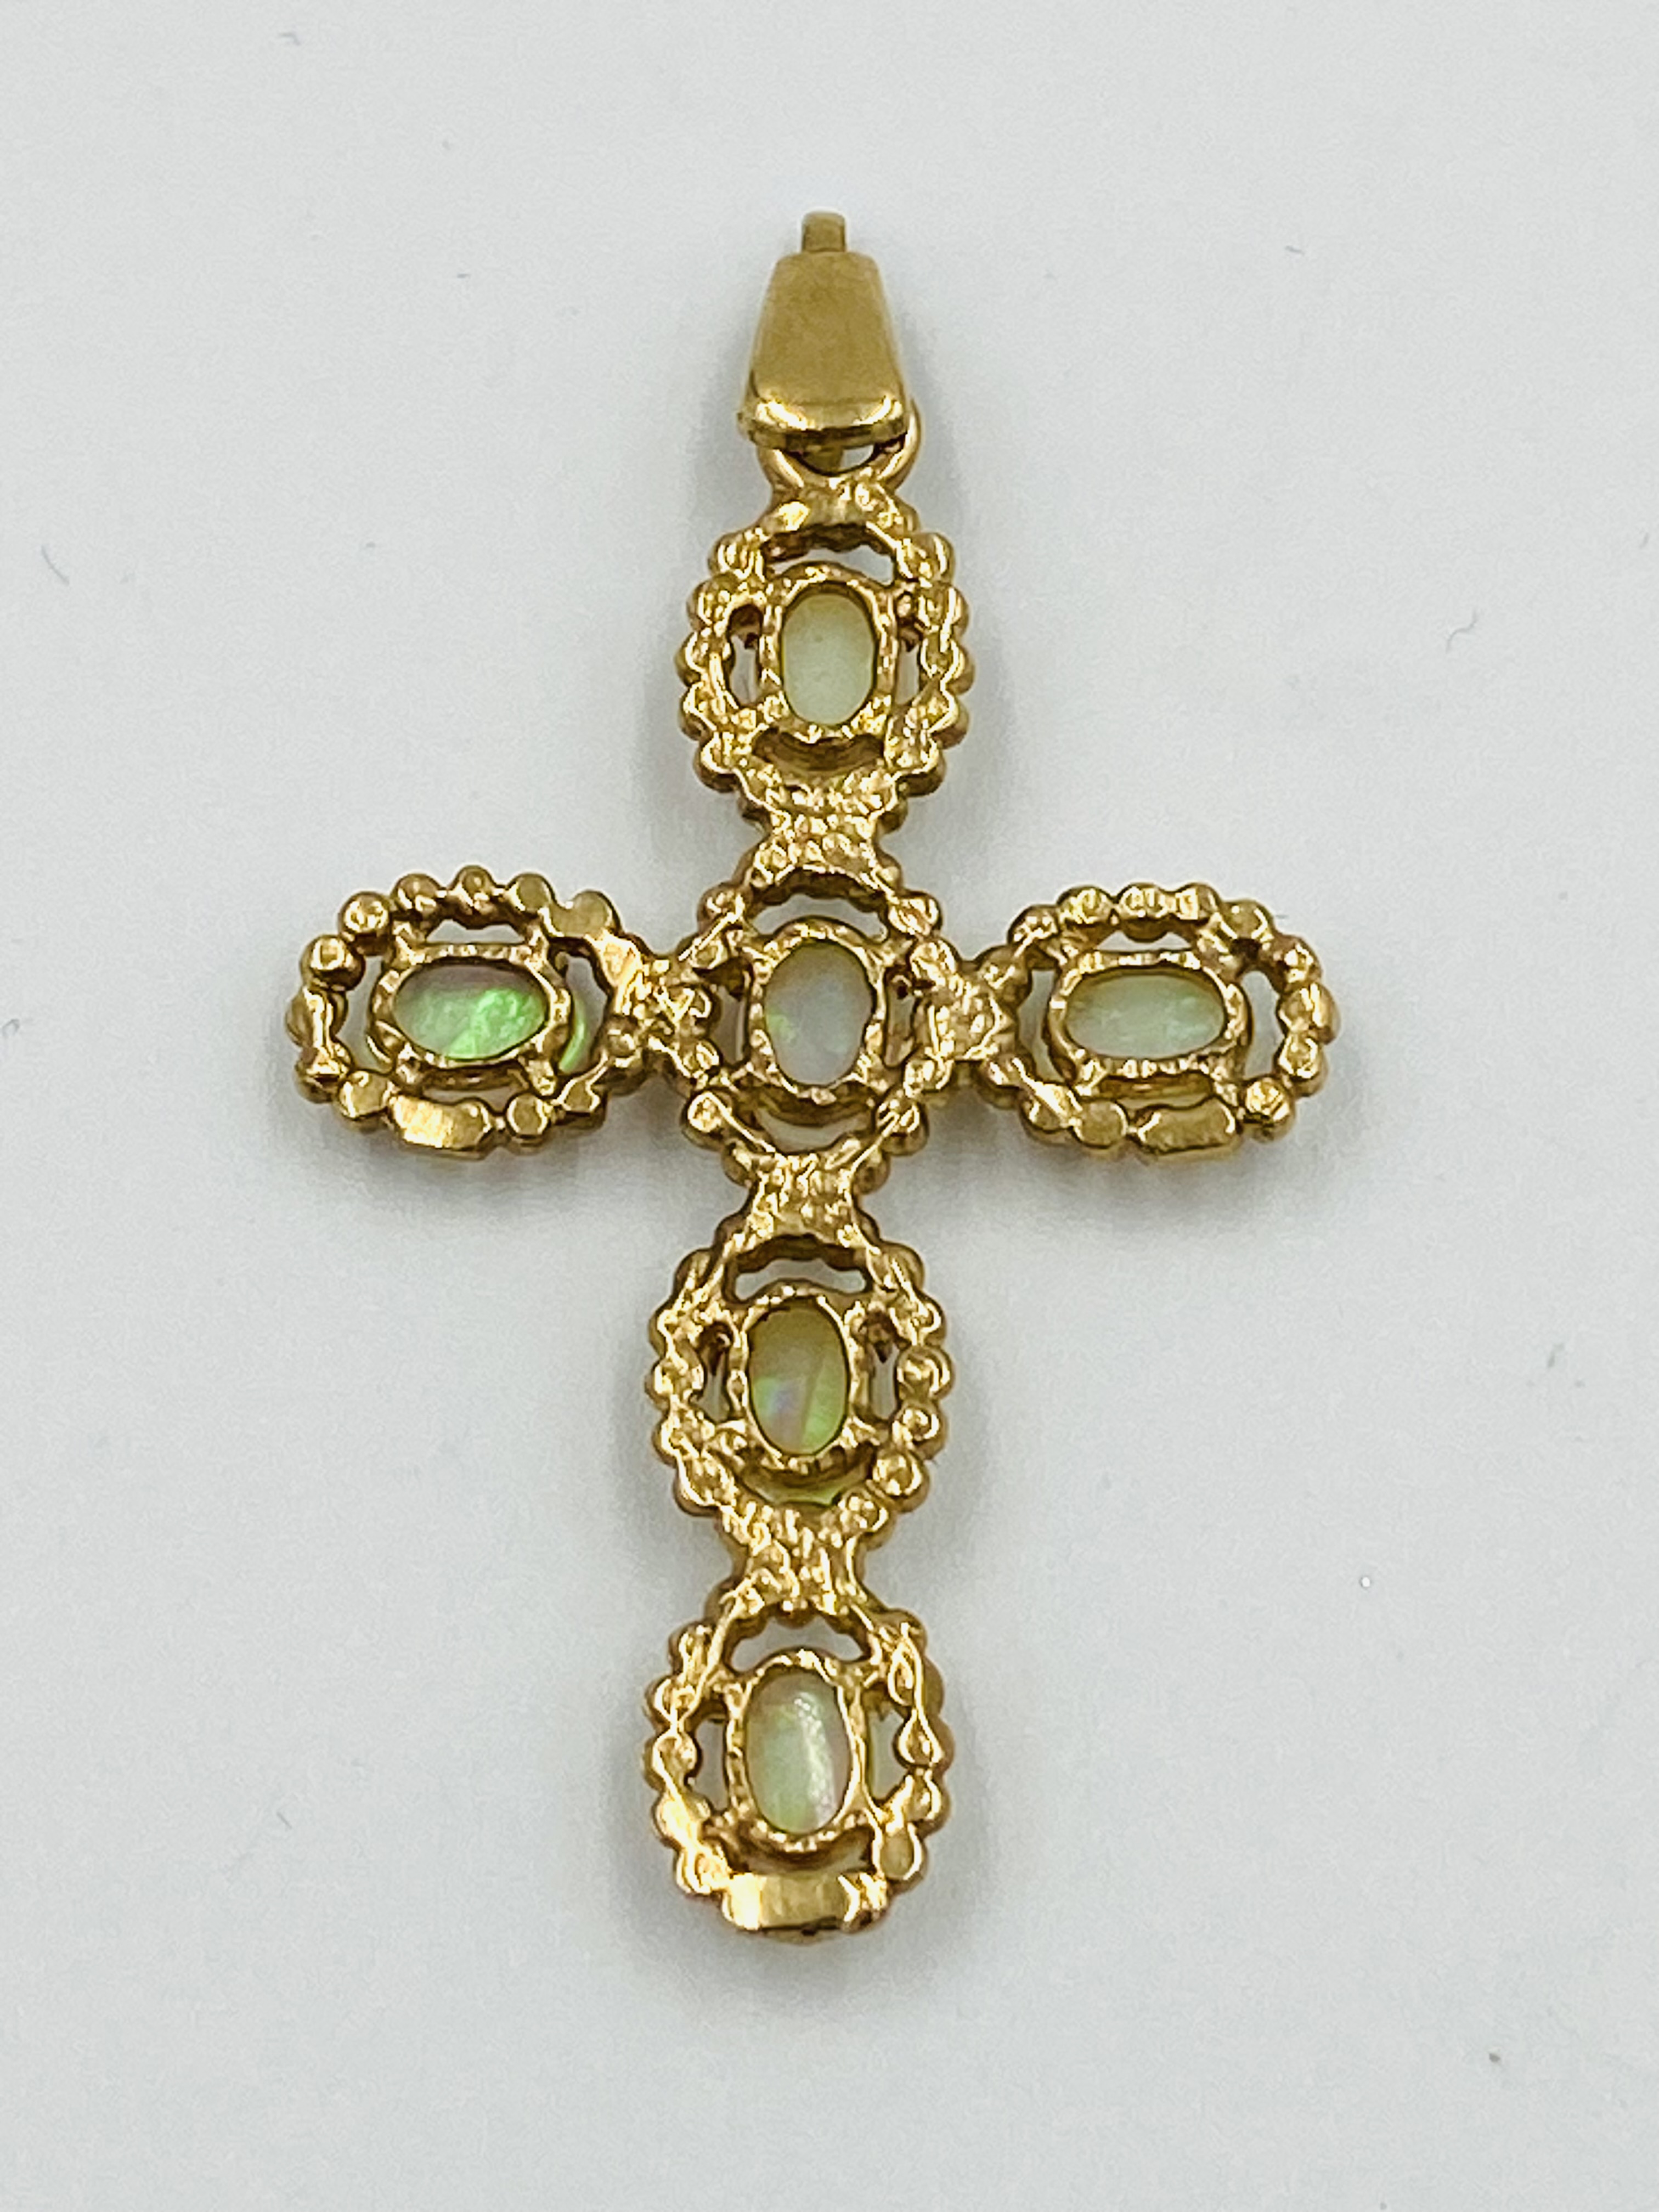 9ct gold and opal pendant - Image 2 of 3